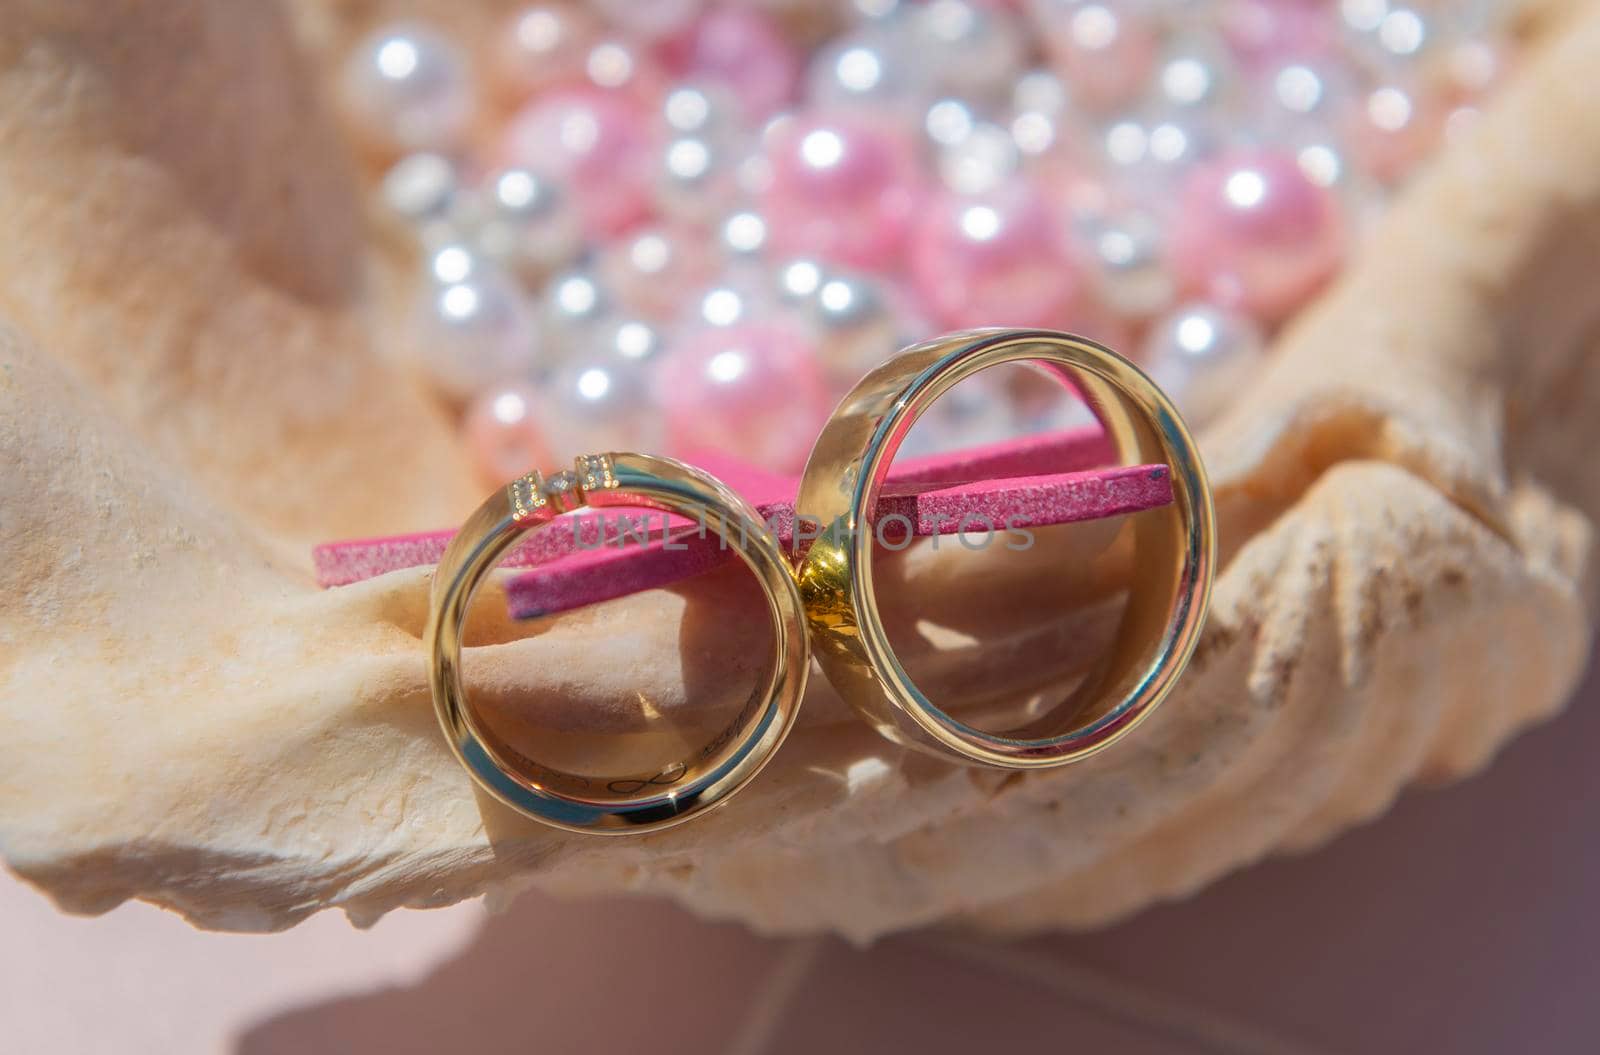 Pair of gold wedding ring bands jewelry on seashell with pink and white pearl beads